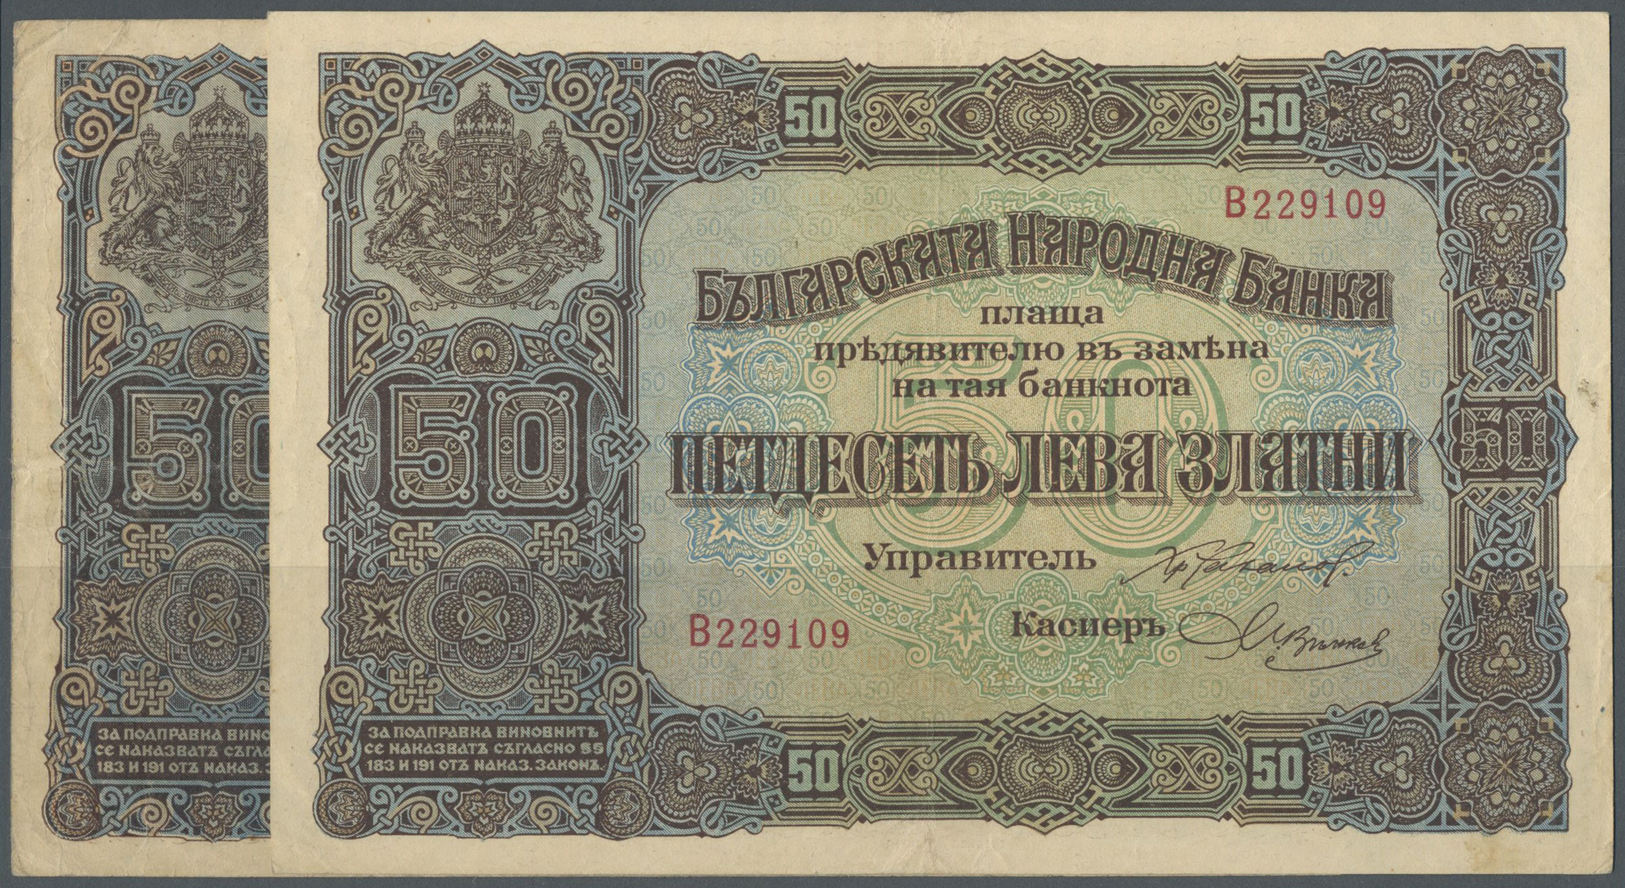 00386 Bulgaria / Bulgarien: Set Of 2 Notes 50 Leva ND(1917) P. 24, Both Folded But One Of Them More Used Than The Other. - Bulgaria